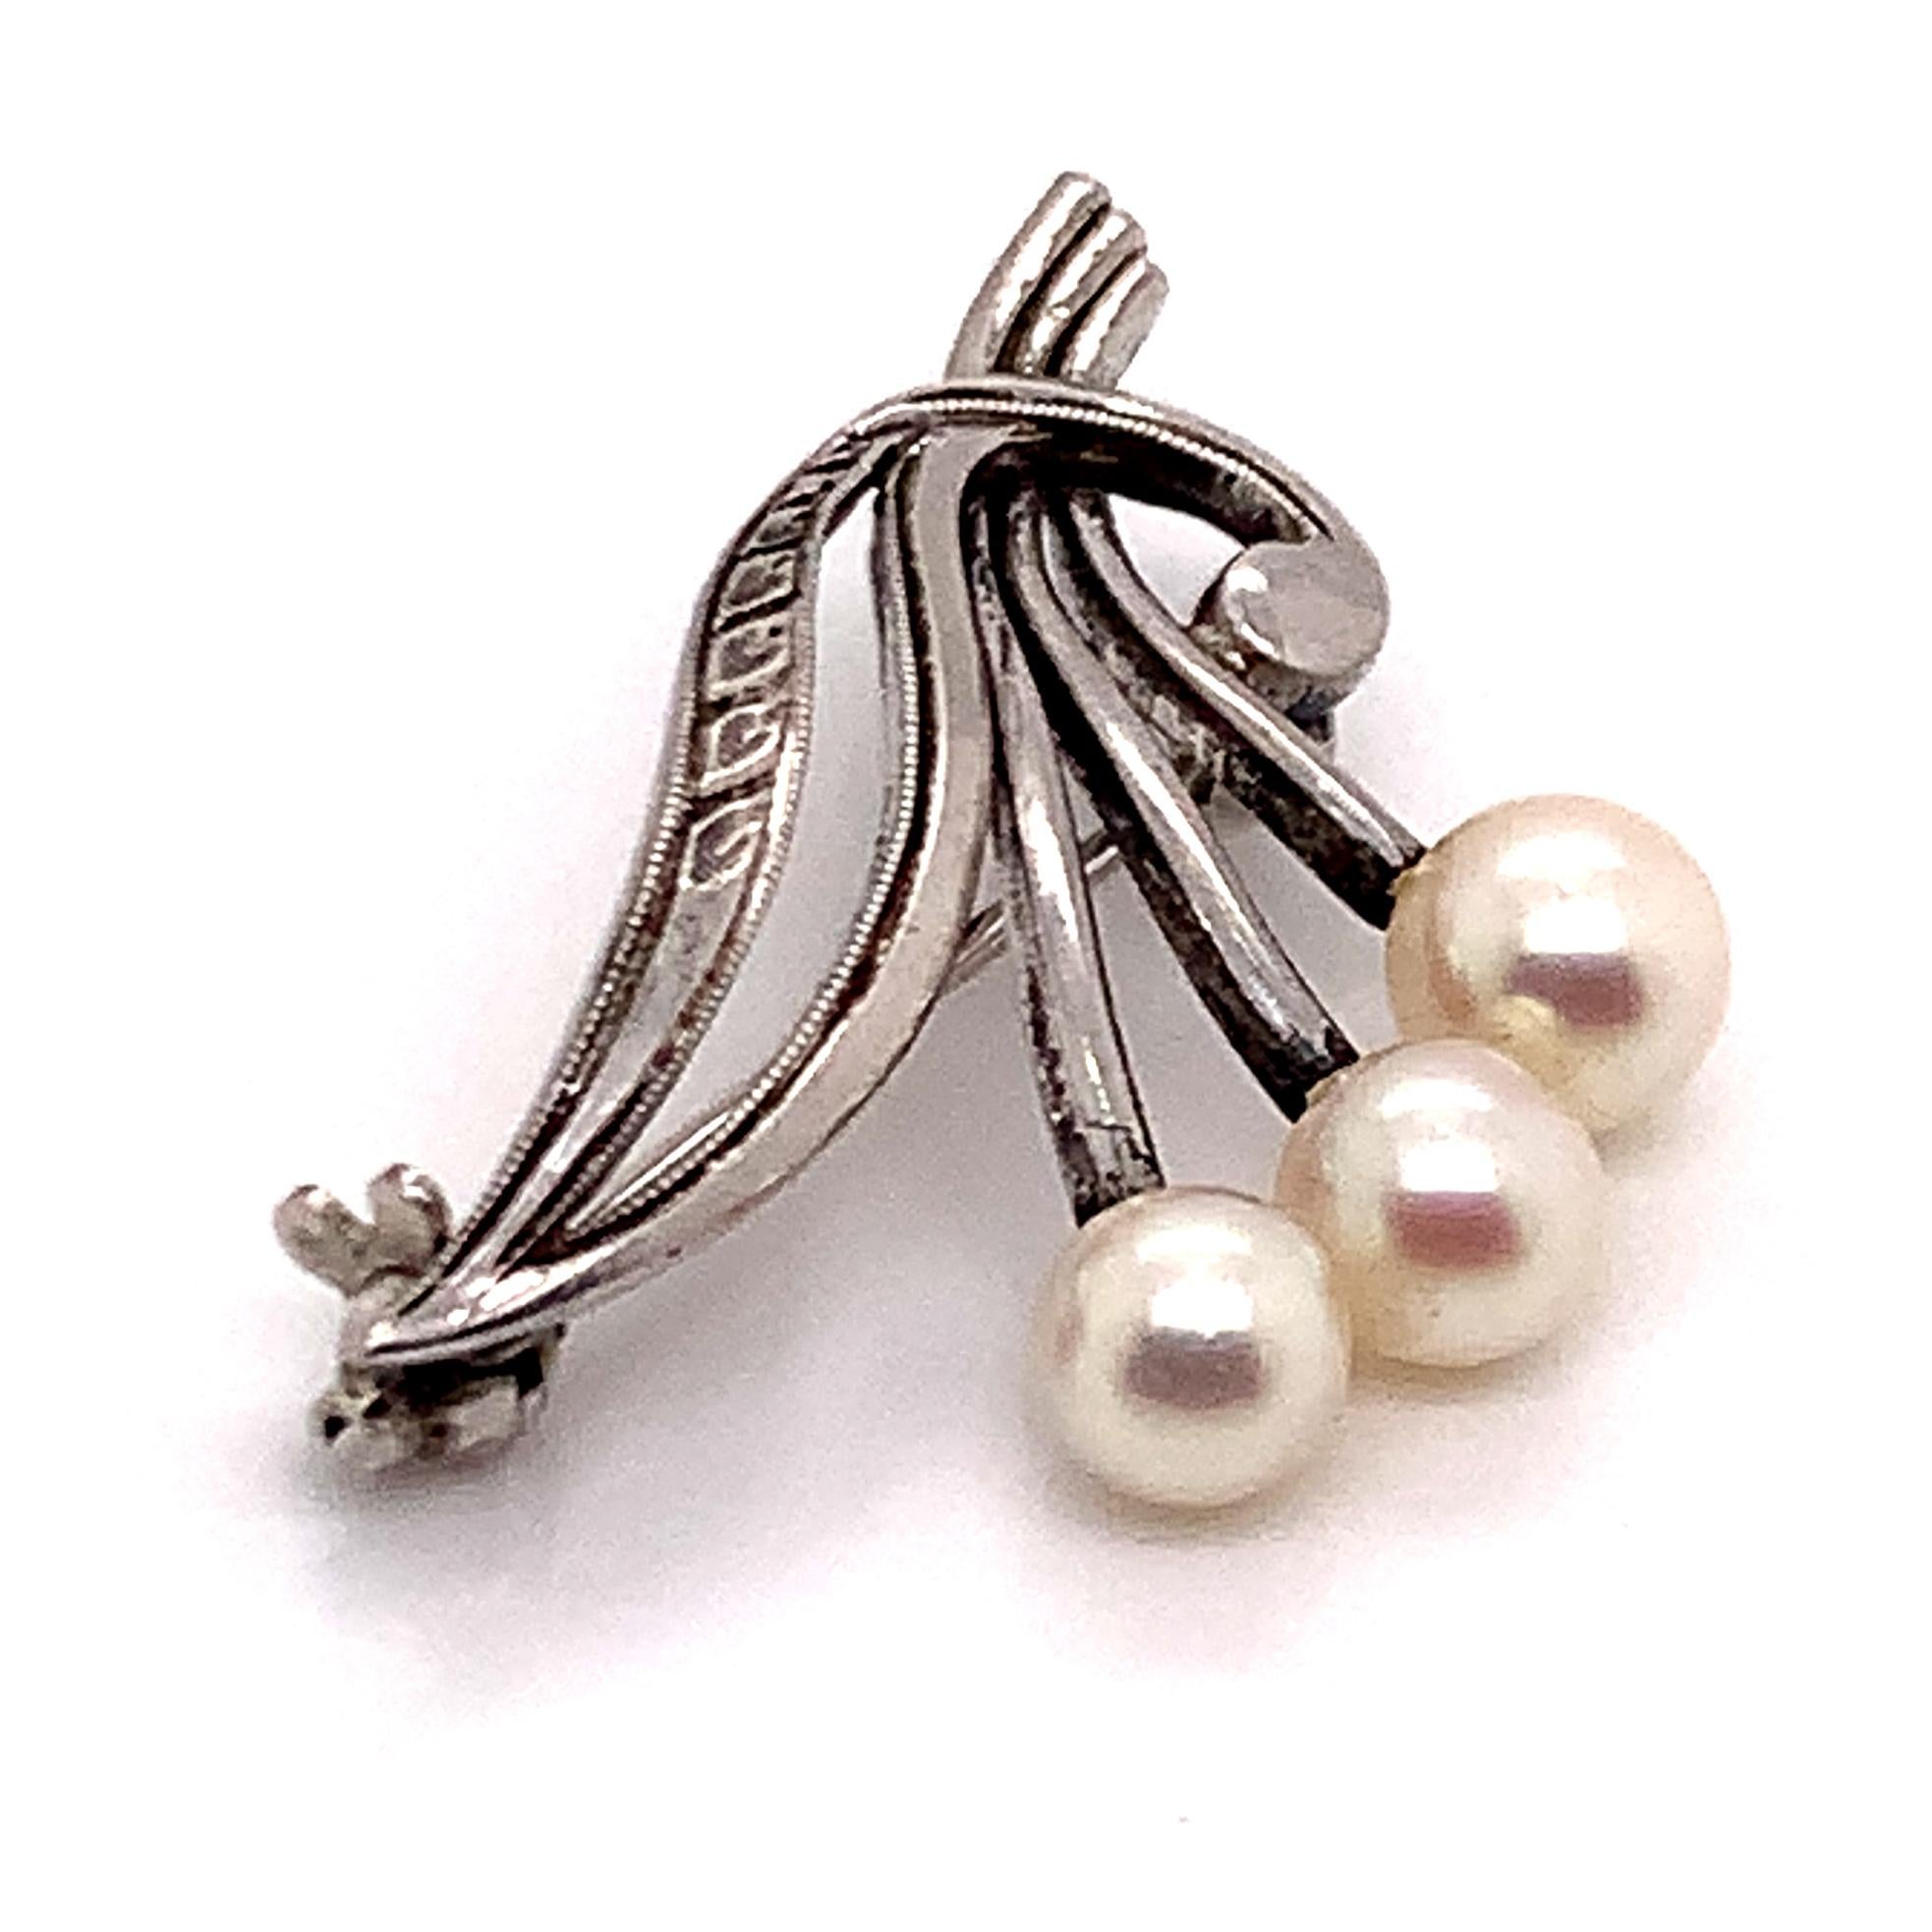 Mikimoto Estate Akoya Pearl Brooch Pin Sterling Silver 5.75 mm M181

This elegant Authentic Mikimoto Estate Akoya pearl brooch pin is made of sterling silver and has 3 Akoya Cultured Pearls ranging in size from 5.15 - 5.75 mm.
TRUSTED SELLER SINCE